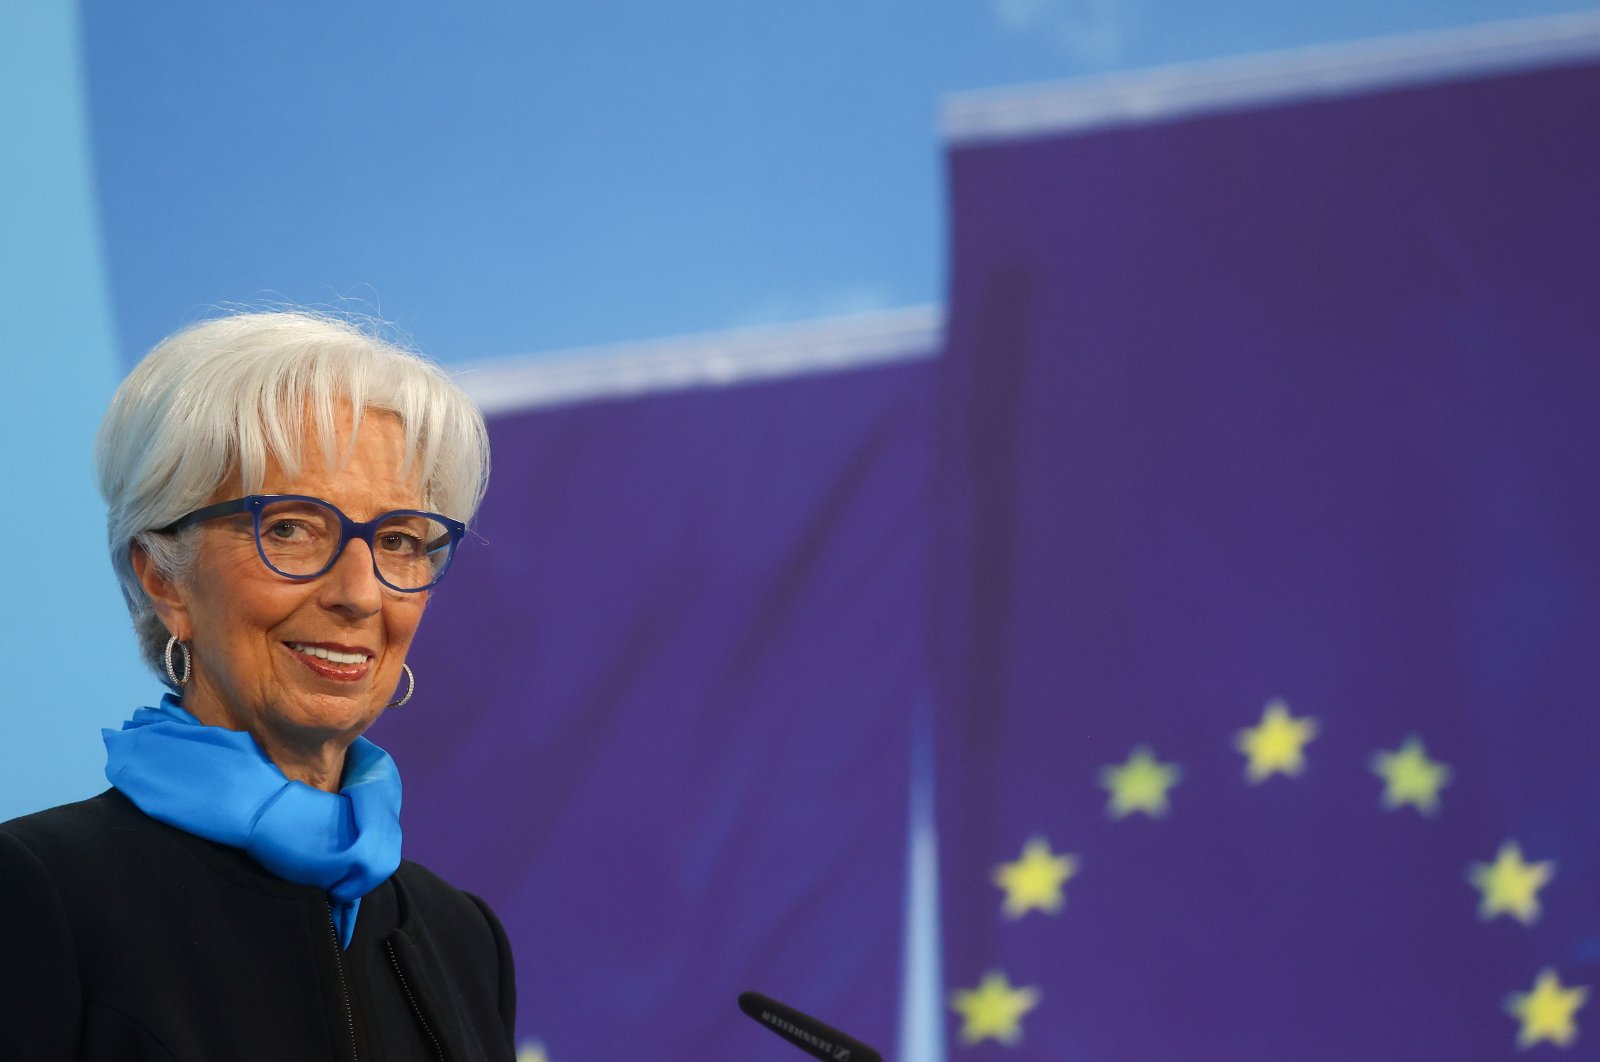 President of the European Central Bank (ECB) Christine Lagarde reacts as she takes part in a news conference on the outcome of the governing council meeting, in Frankfurt, Germany, Oct. 28, 2021. (Reuters Photo)